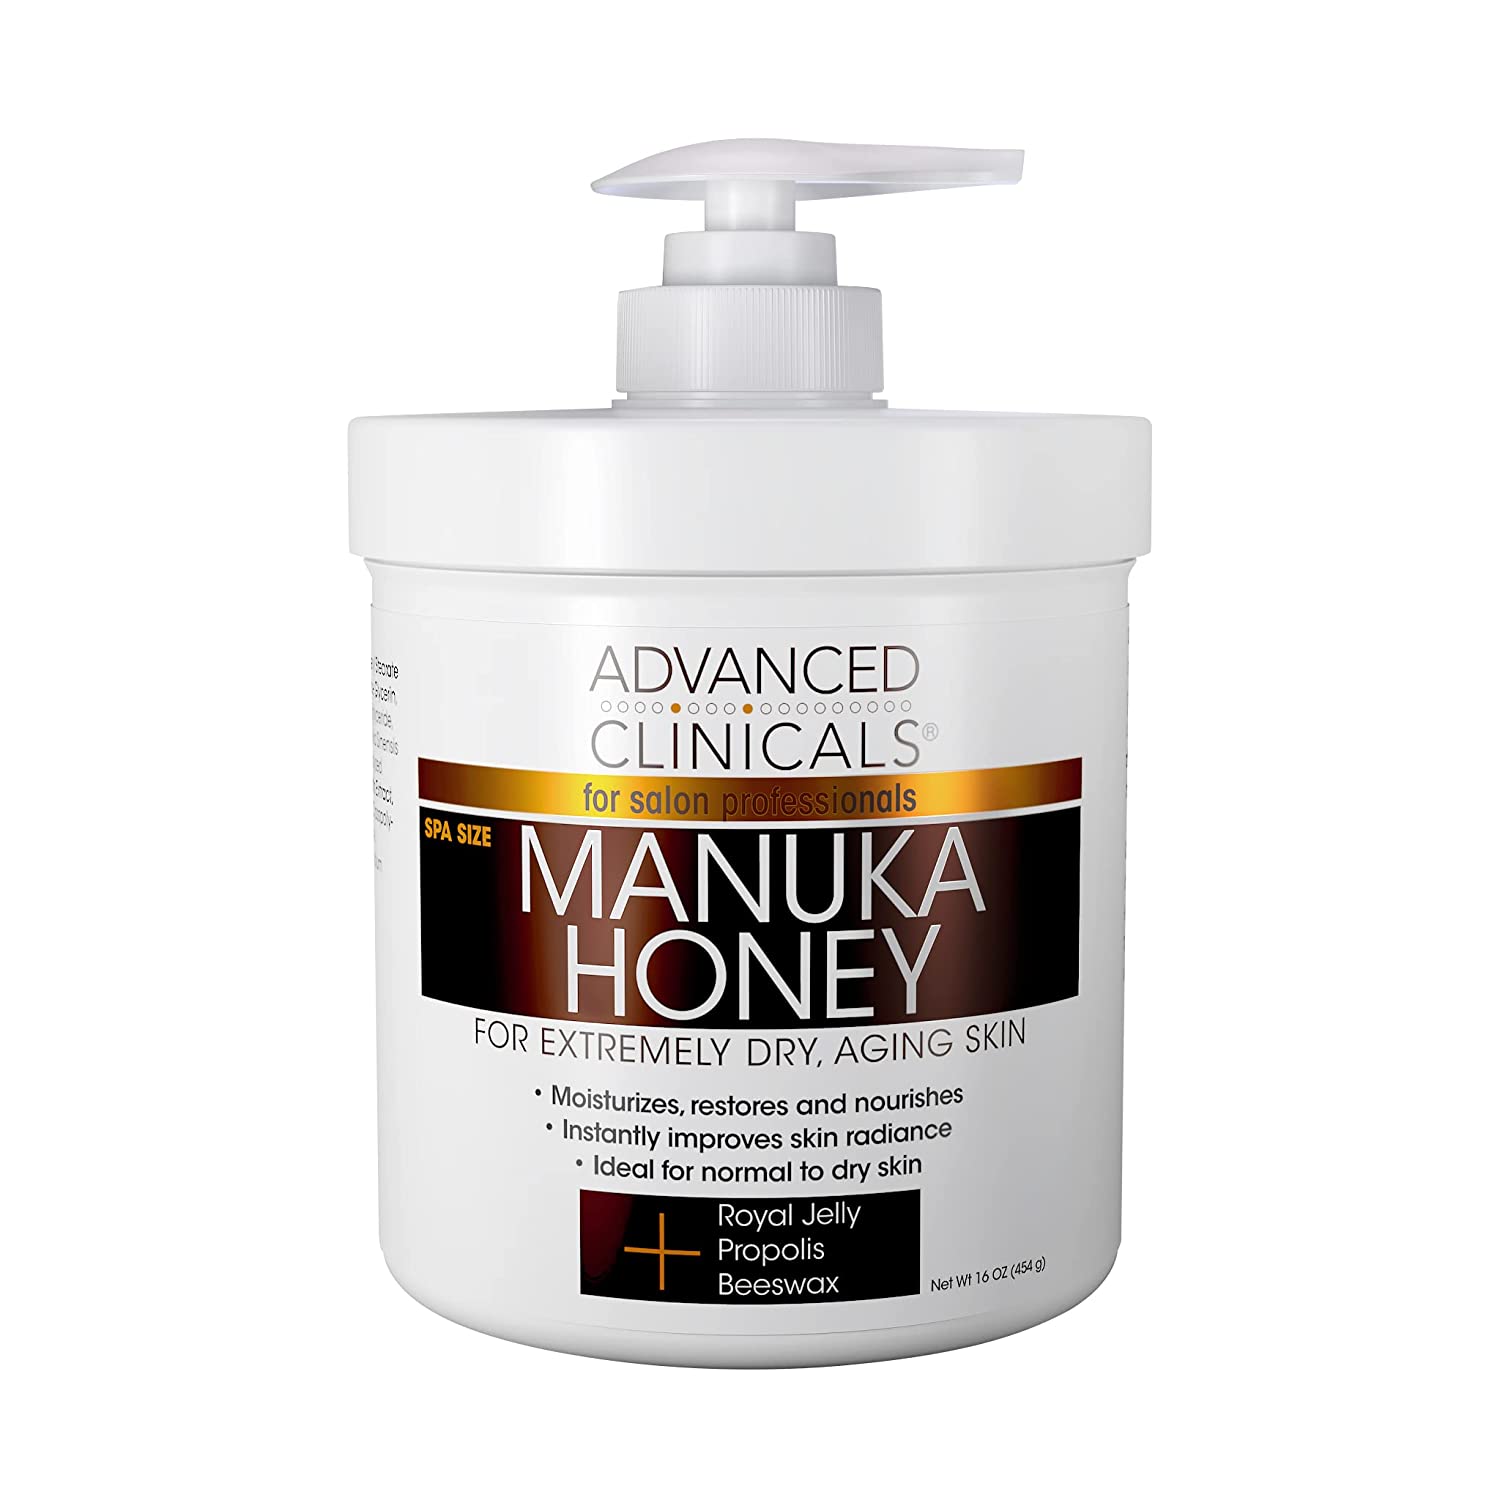 Advanced Clinicals Manuka Honey Cream for Extremely Dry, Aging Skin